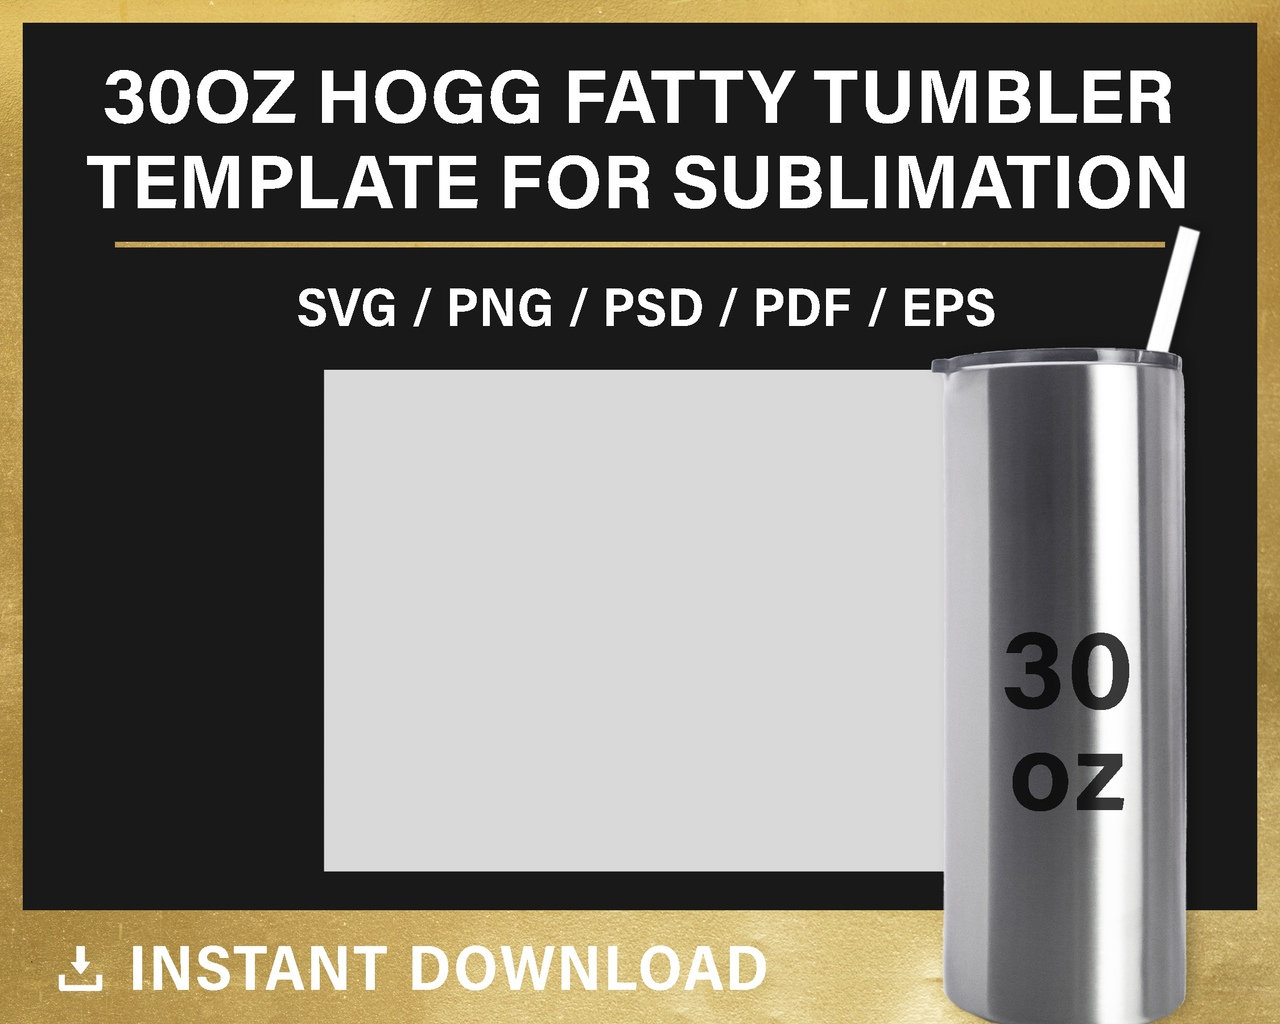 30oz Fatty Tumbler Template for Sublimation Hogg Full Wrap Etsy